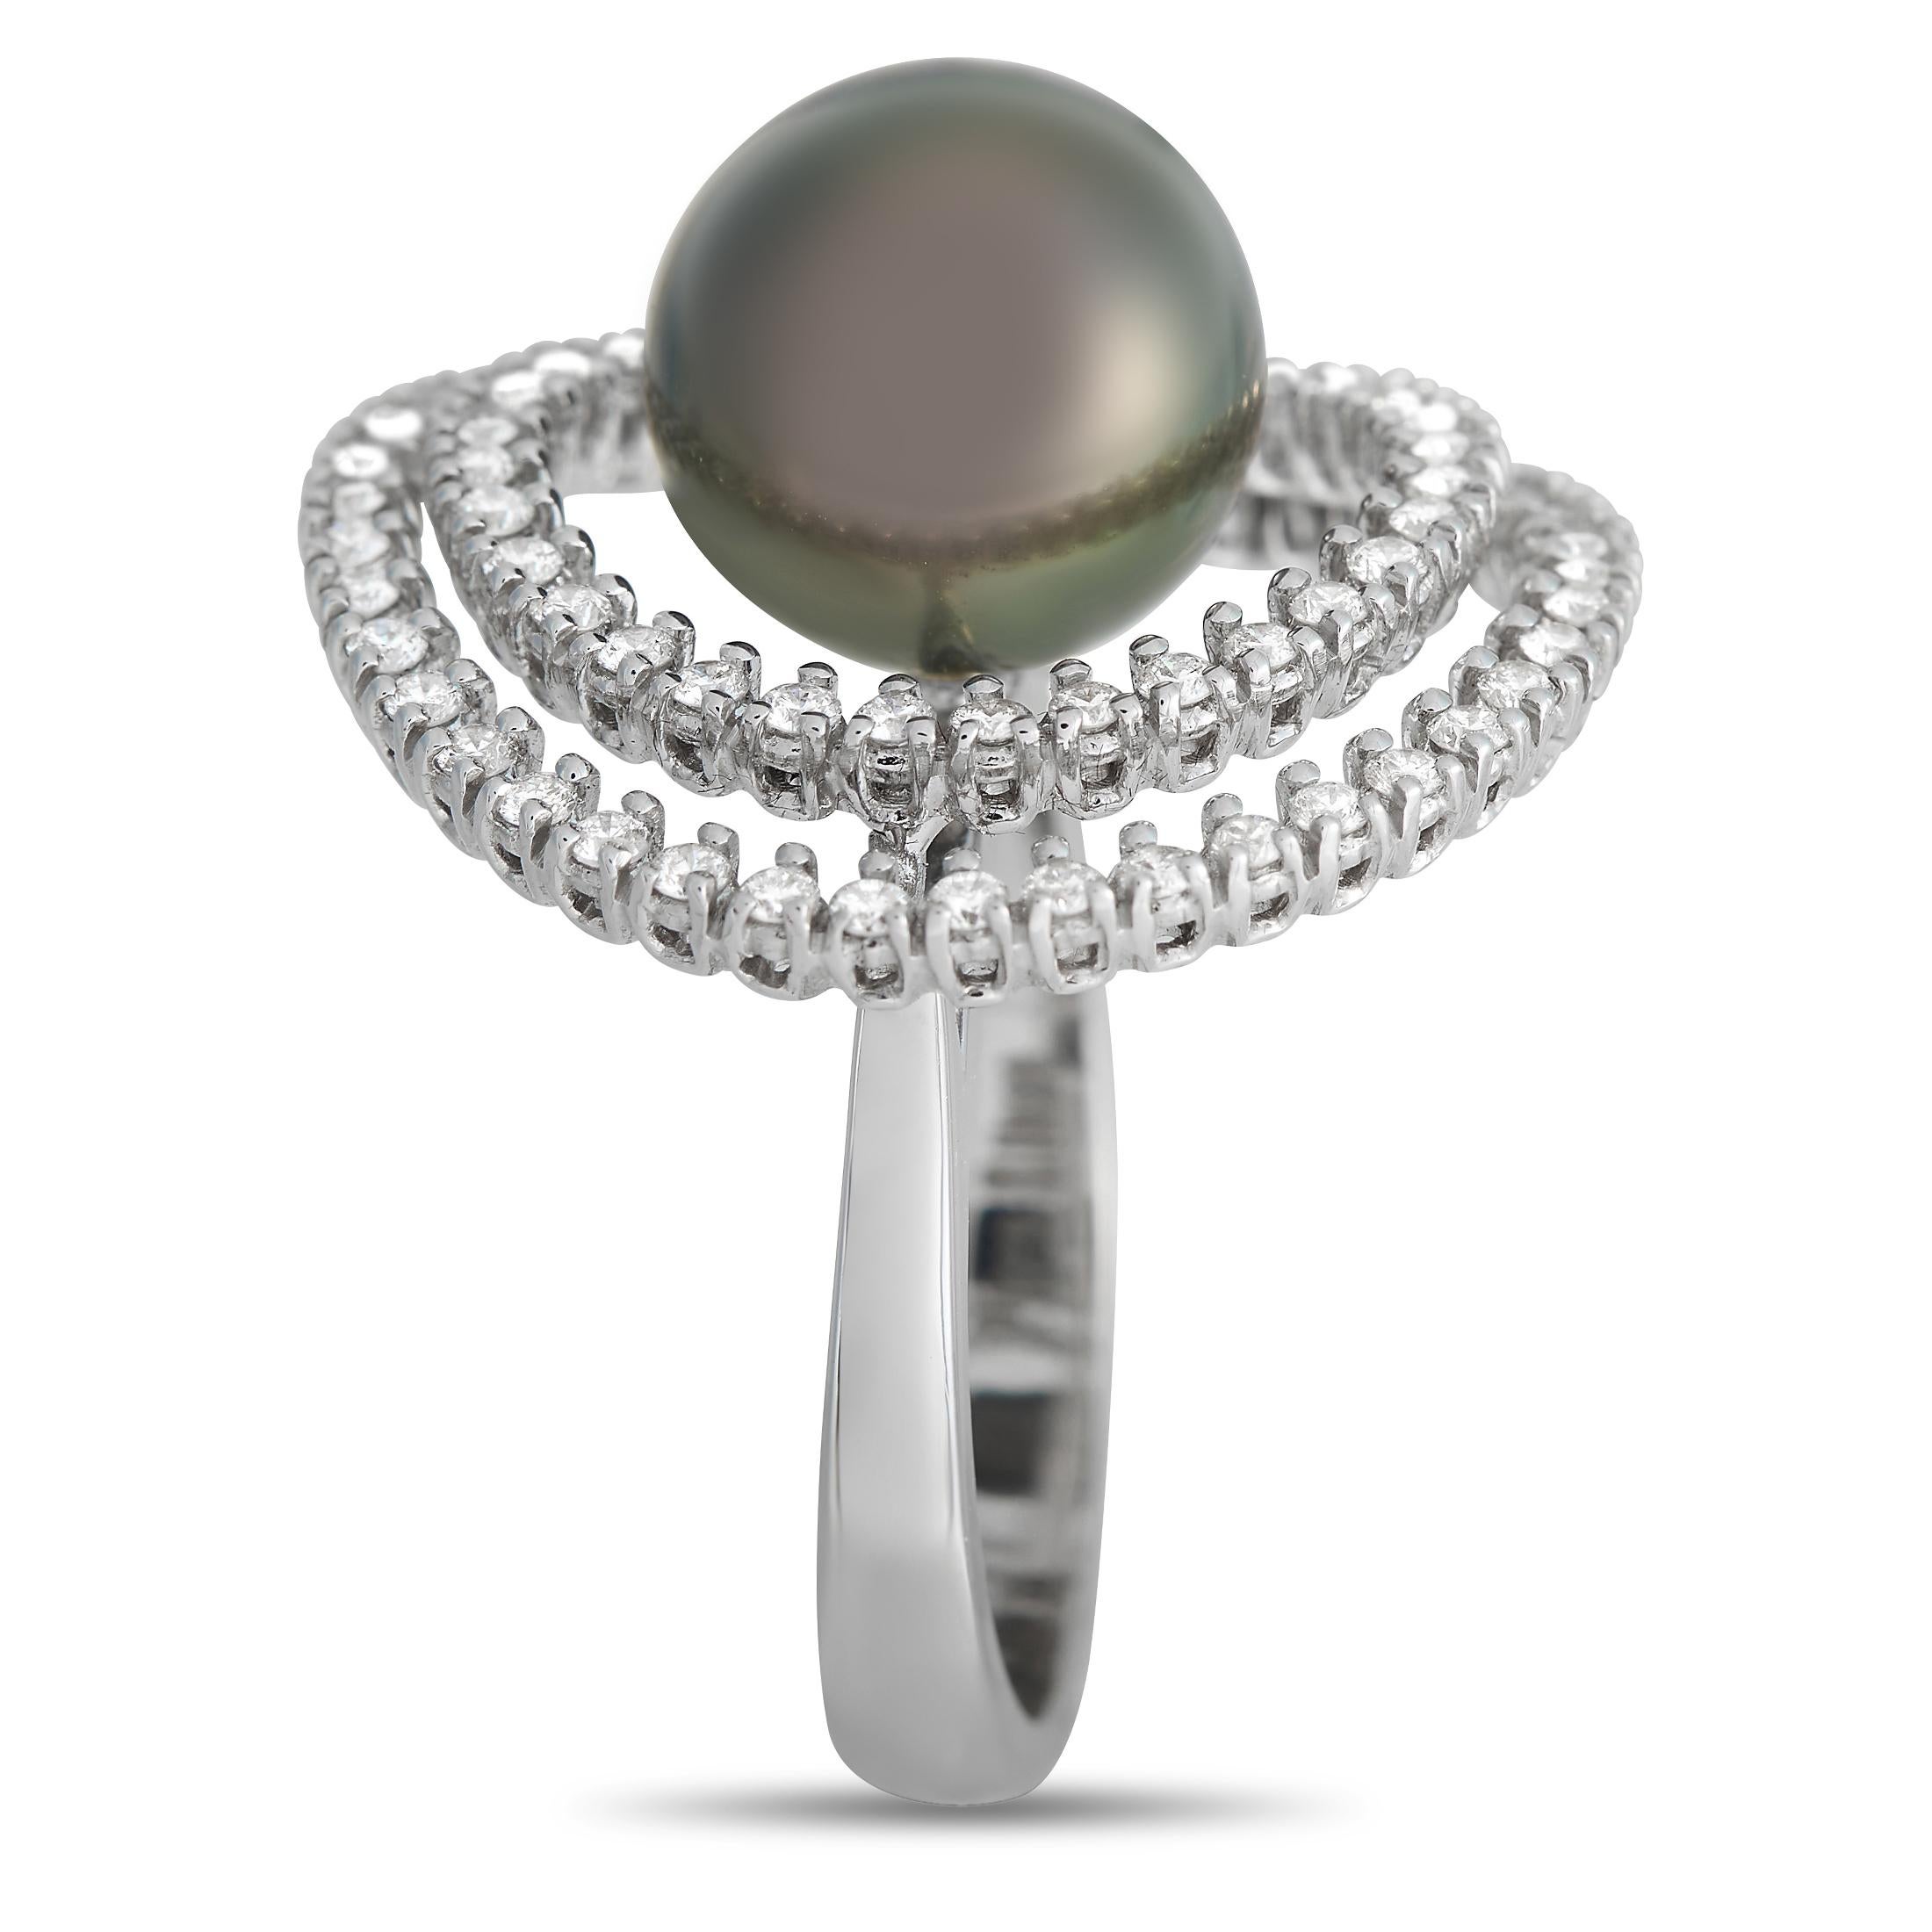 This Piero Milano ring is bold, eye-catching, and delightfully unexpected. On this dynamic design, a double halo of diamonds totaling 0.98 carats encircle a single black pearl suspended in the center of the 18K White Gold setting. This creative